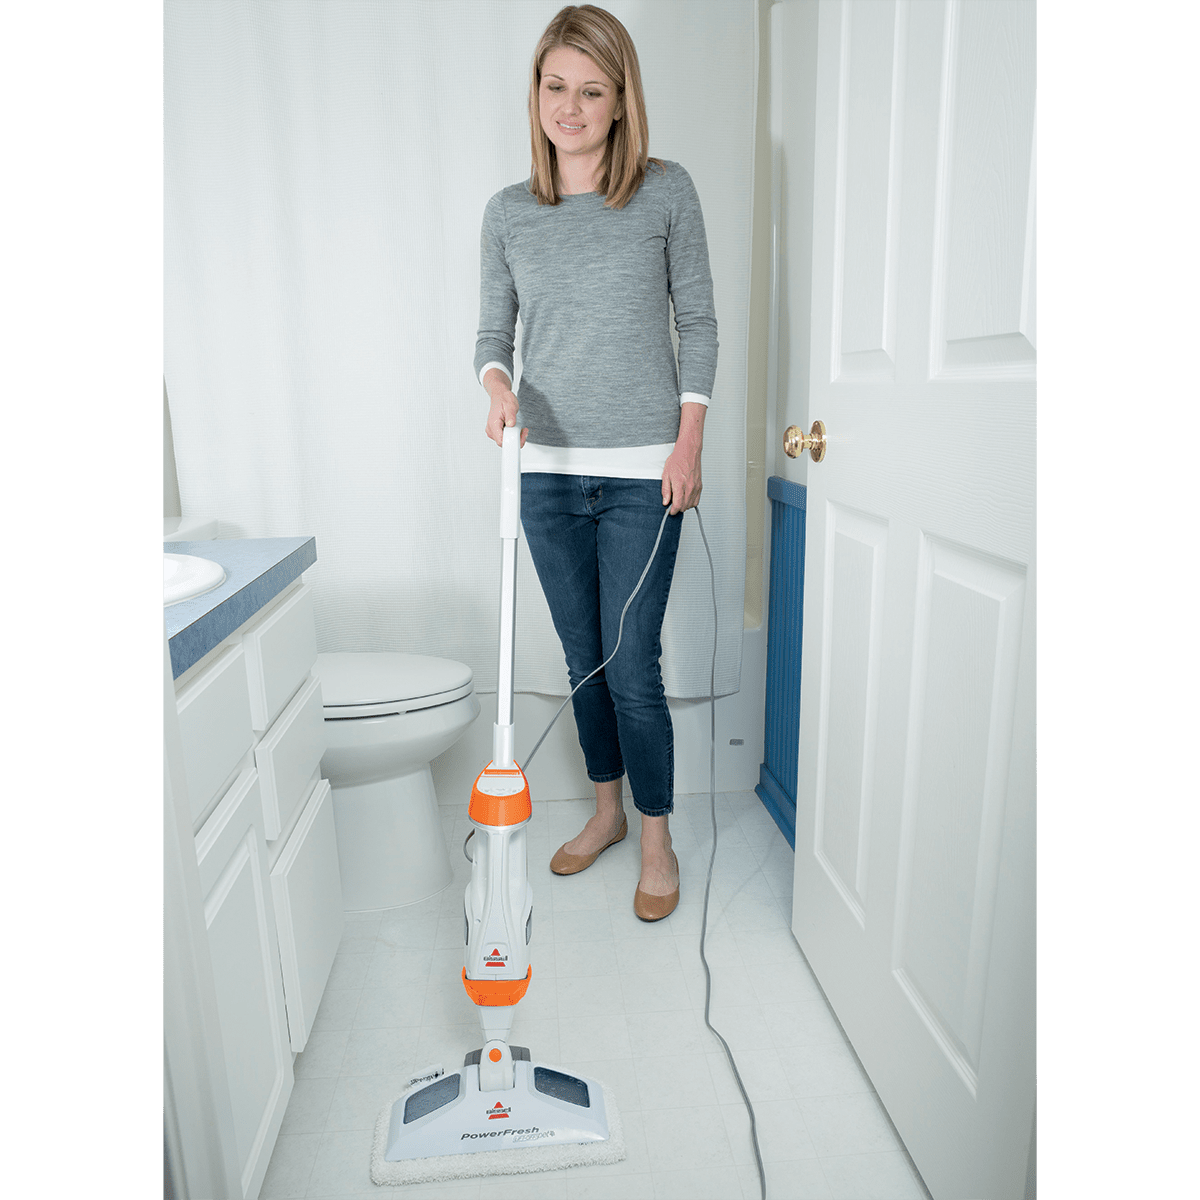 https://s3-assets.sylvane.com/media/images/products/bissell-powerfresh-pet-lift-off-steam-mop-lifestyle.png